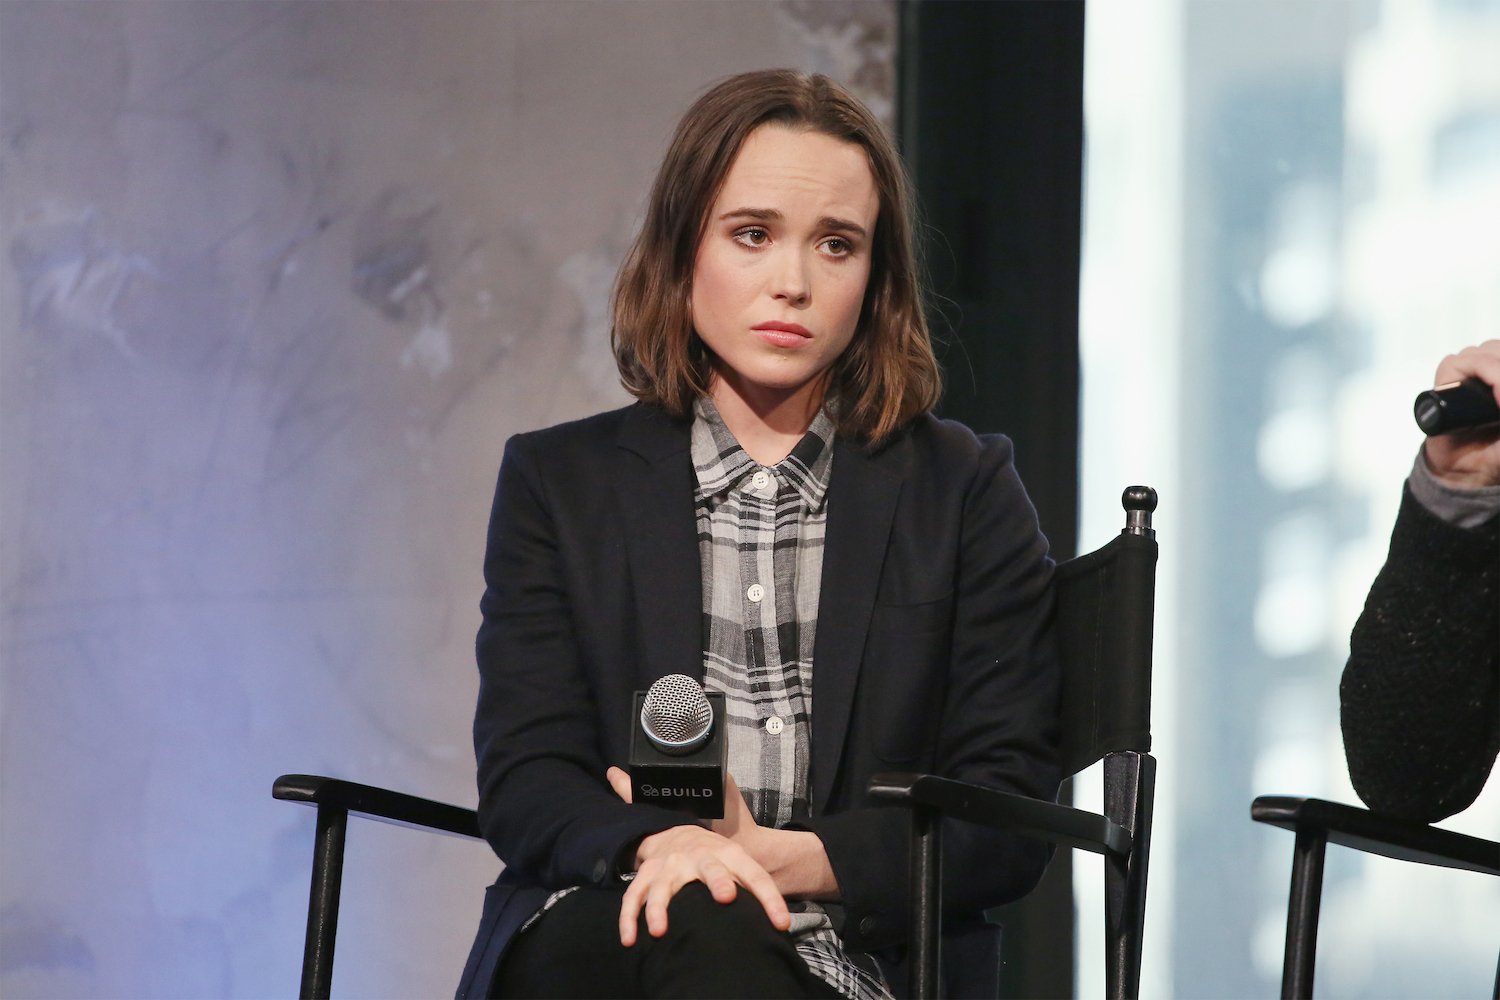 Ellen Page not smiling, looking away from the camera holding a microphone